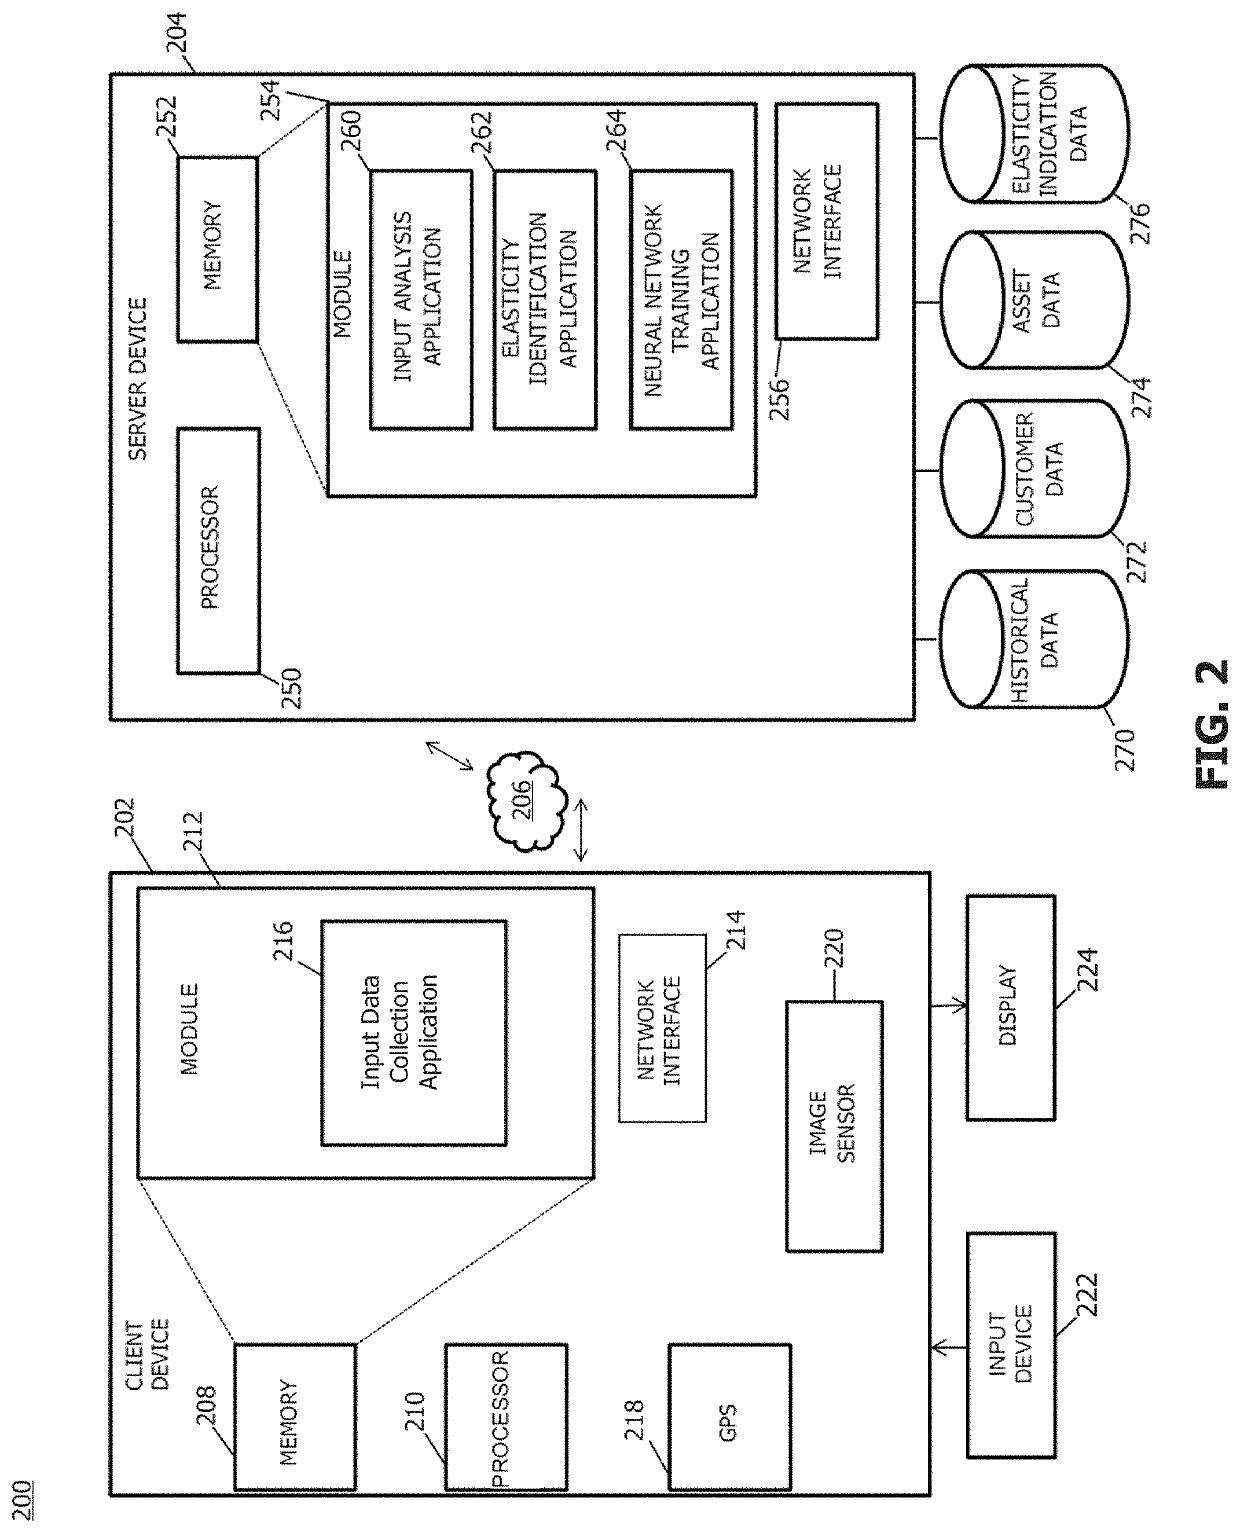 Machine learning systems and methods for elasticity analysis